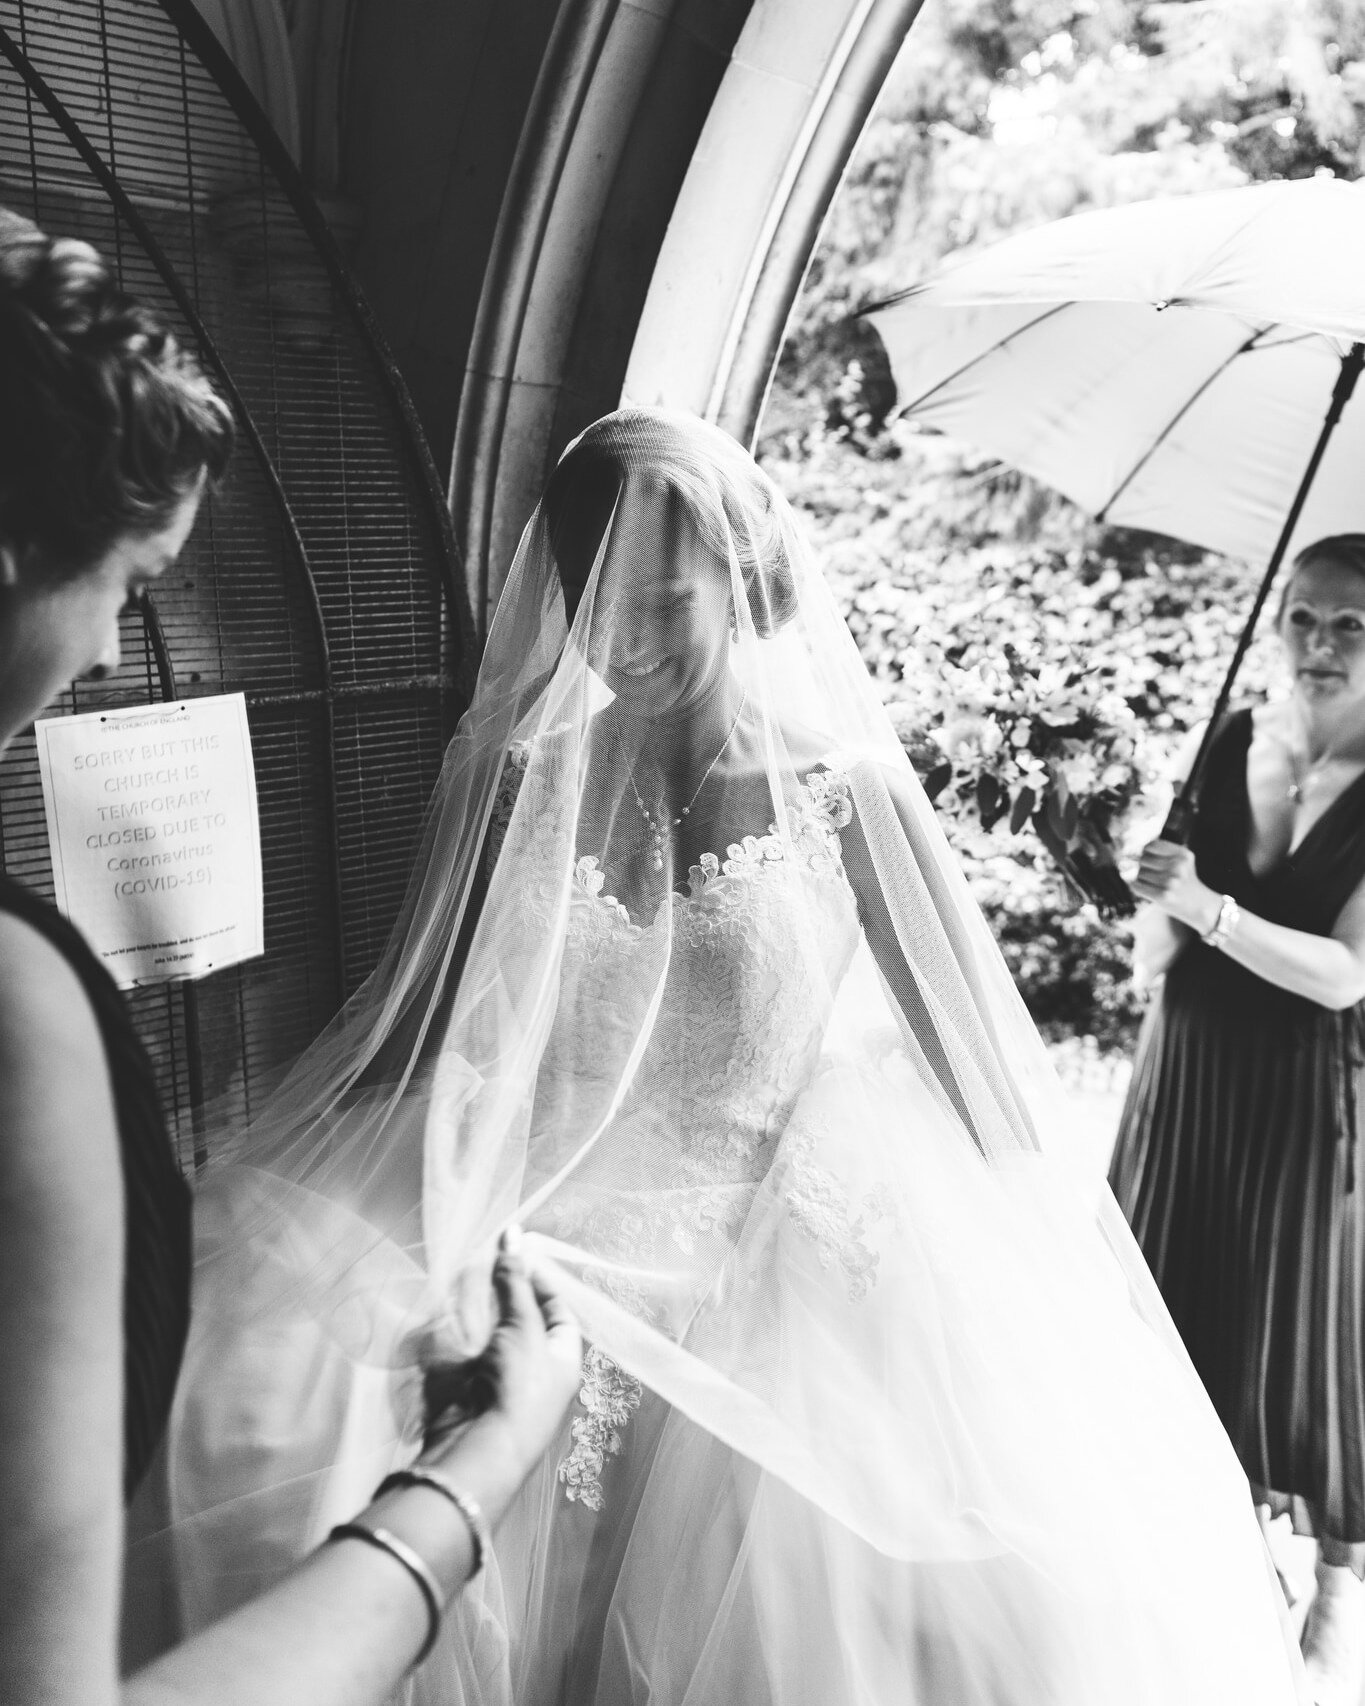 Rain couldn't dampen the joy and love at Saturday's weddings! Despite the weather, the ceremony's were absolutely beautiful and the receptions were a blast. The happy couple danced the night away surrounded by family and friends, and we all felt grat